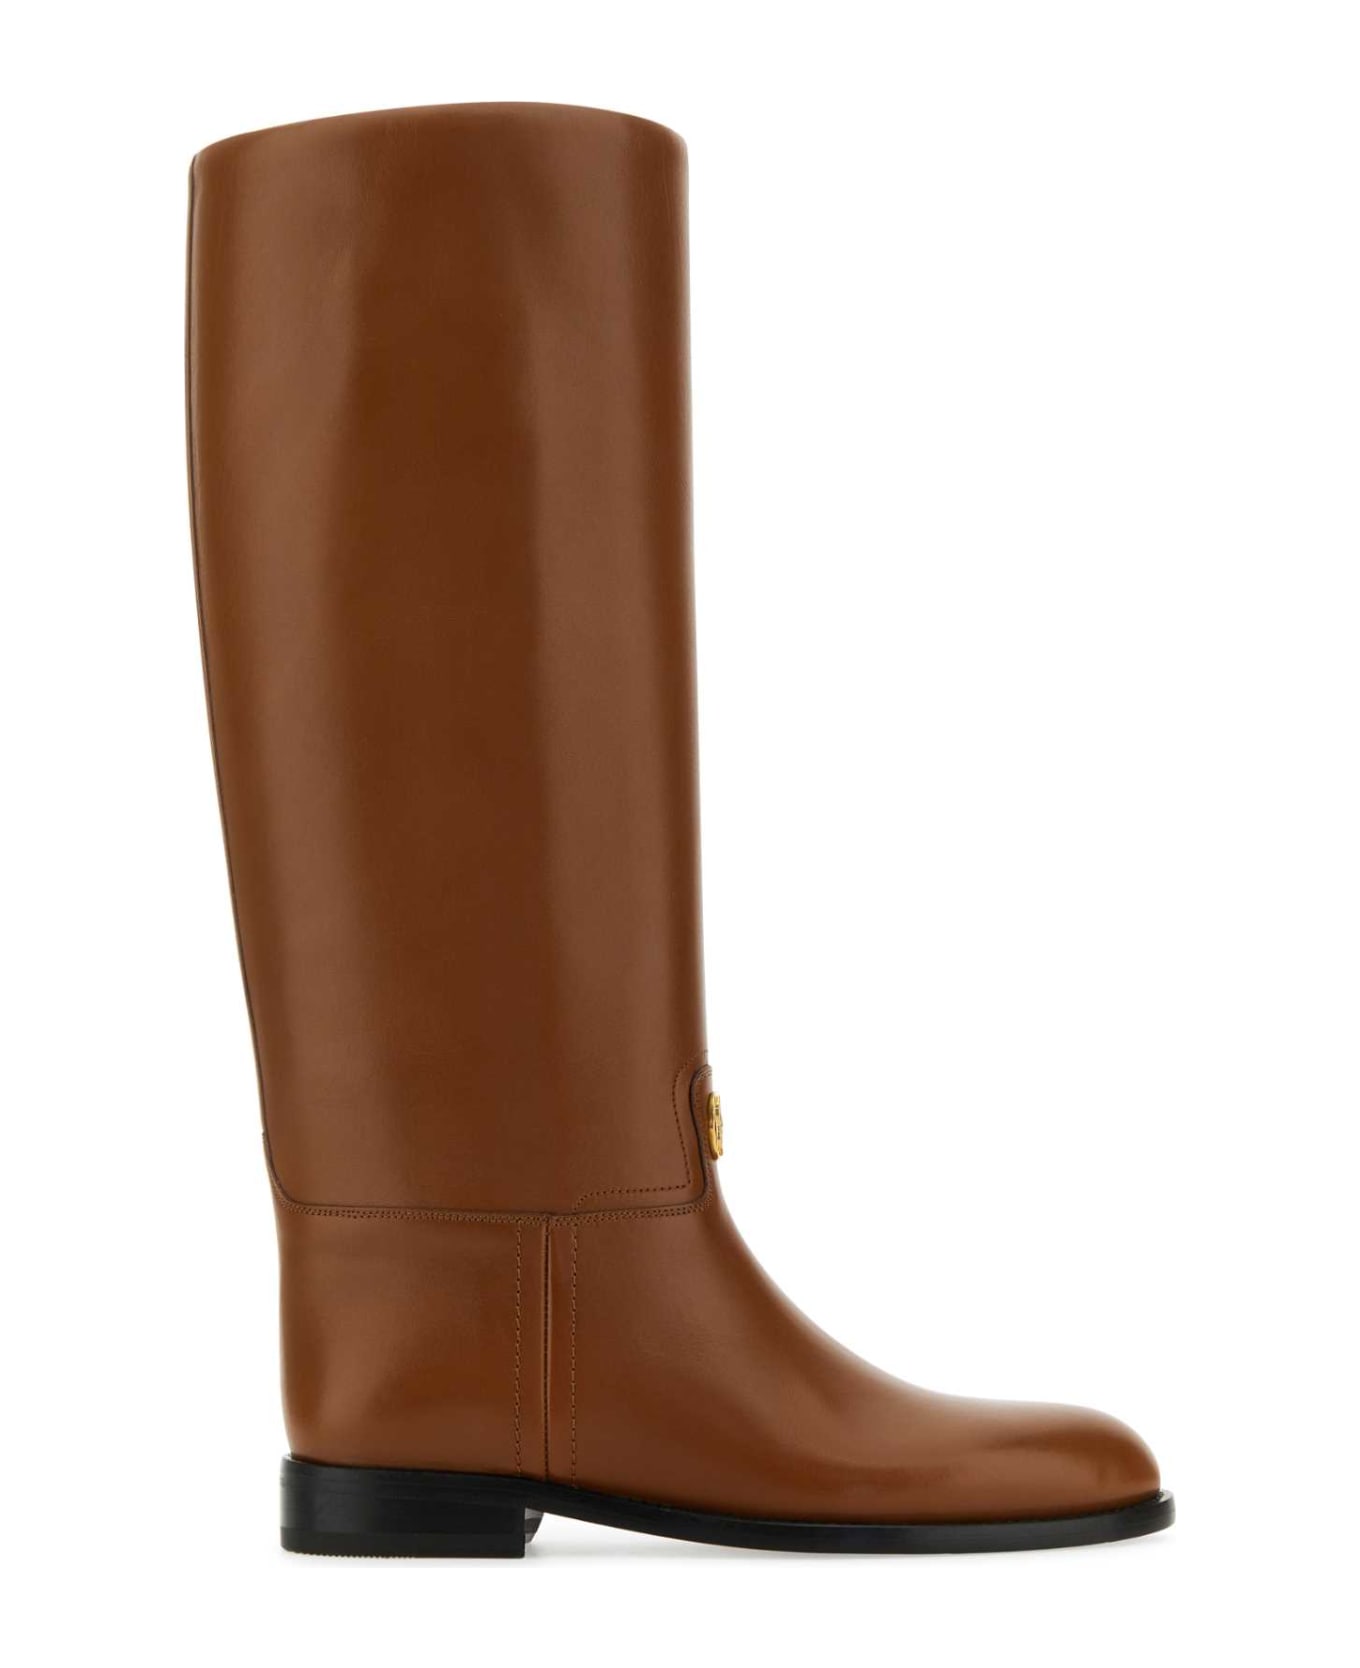 Bally Brown Leather Hollie Boots - CUERO21 ブーツ